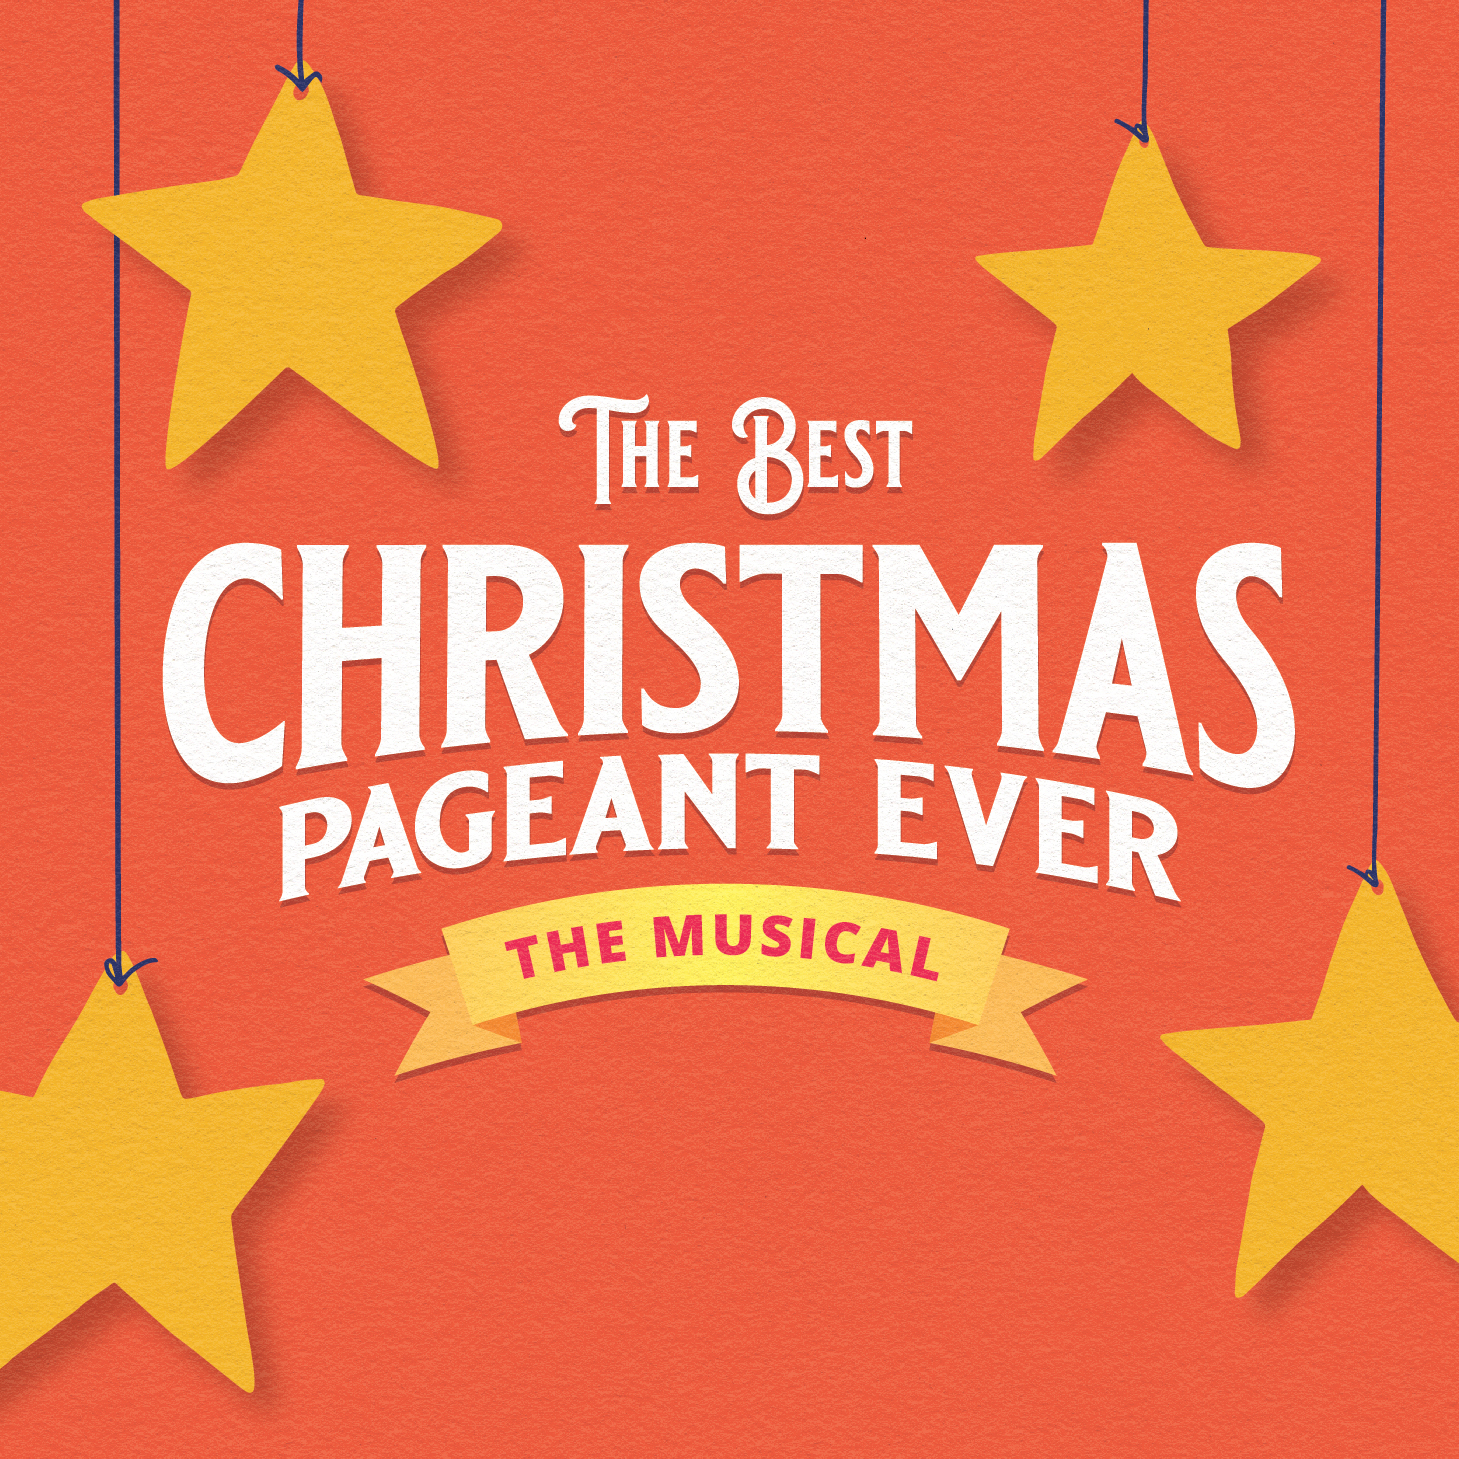 The Best Christmas Pageant Ever: The Musical returns to First Stage this holiday season!